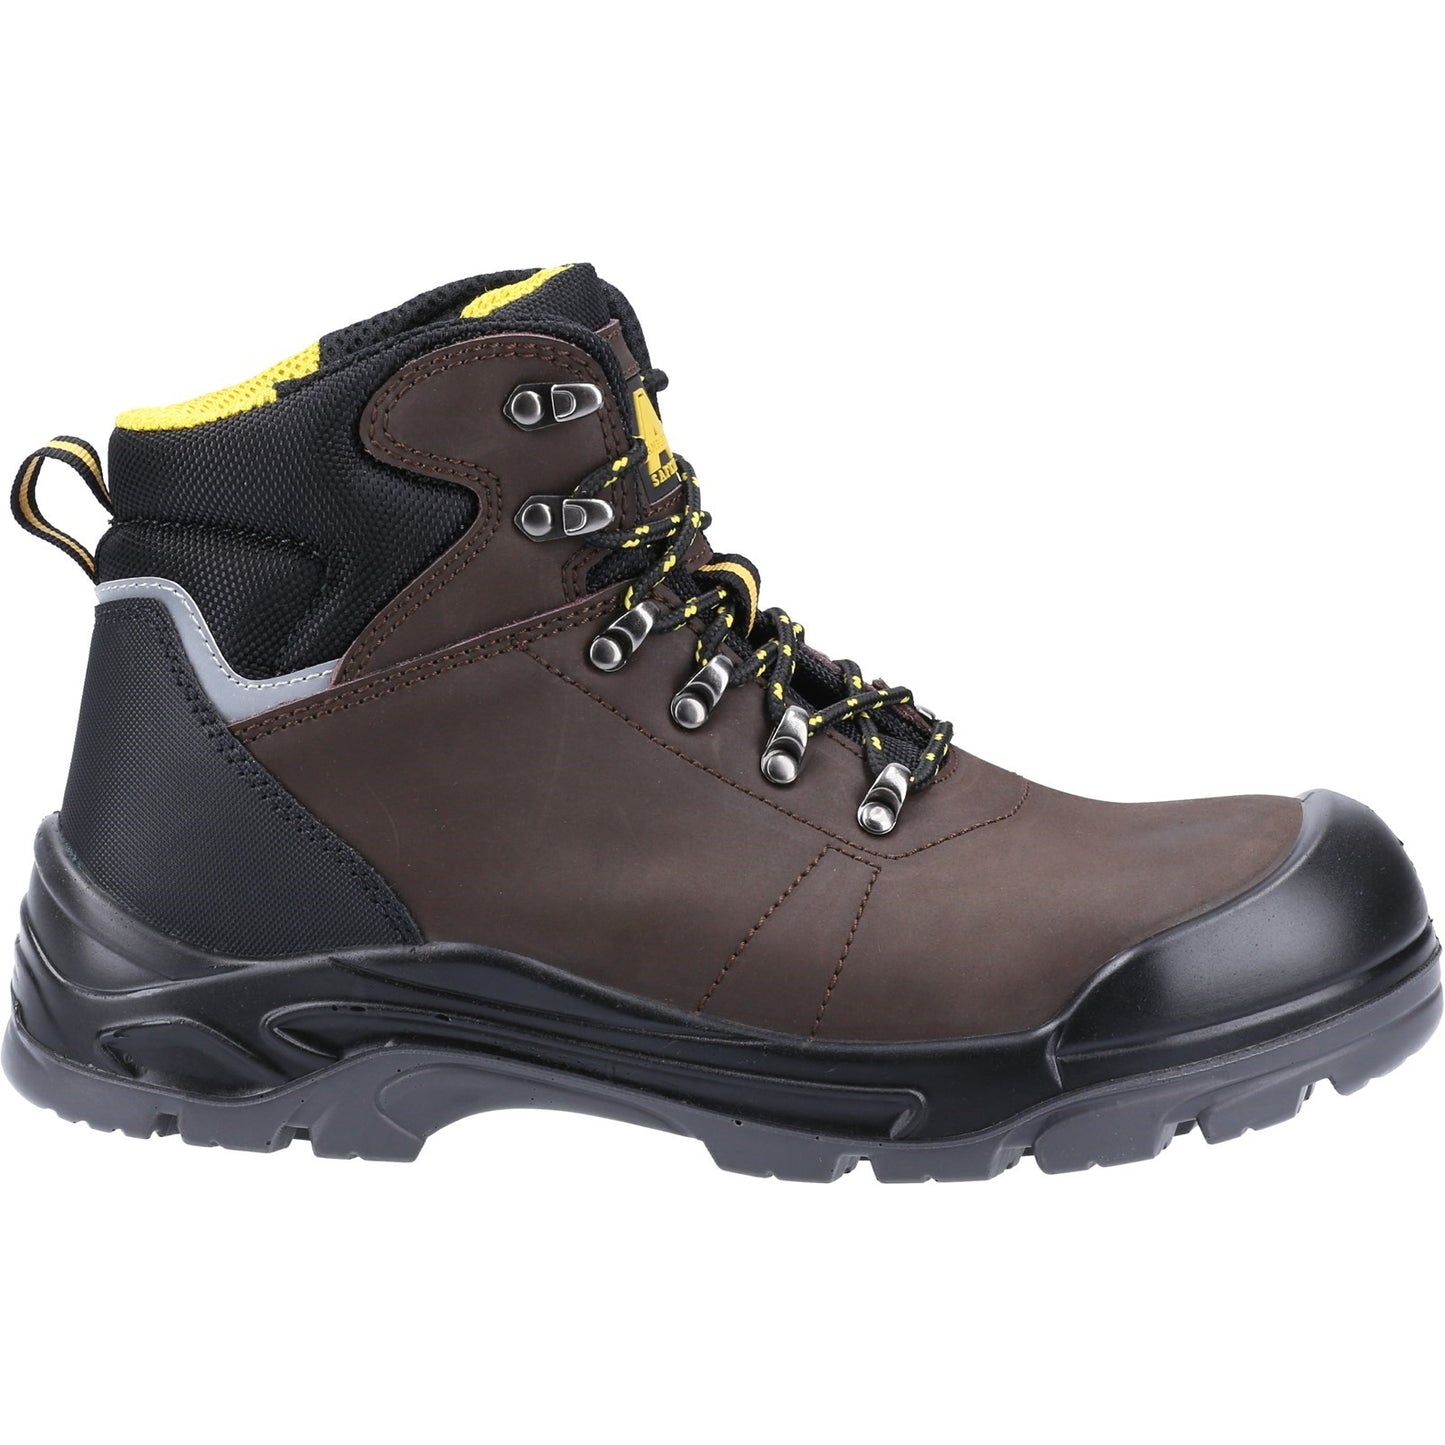 Men's Amblers Safety AS203 Laymore Water Resistant Leather Safety Boot